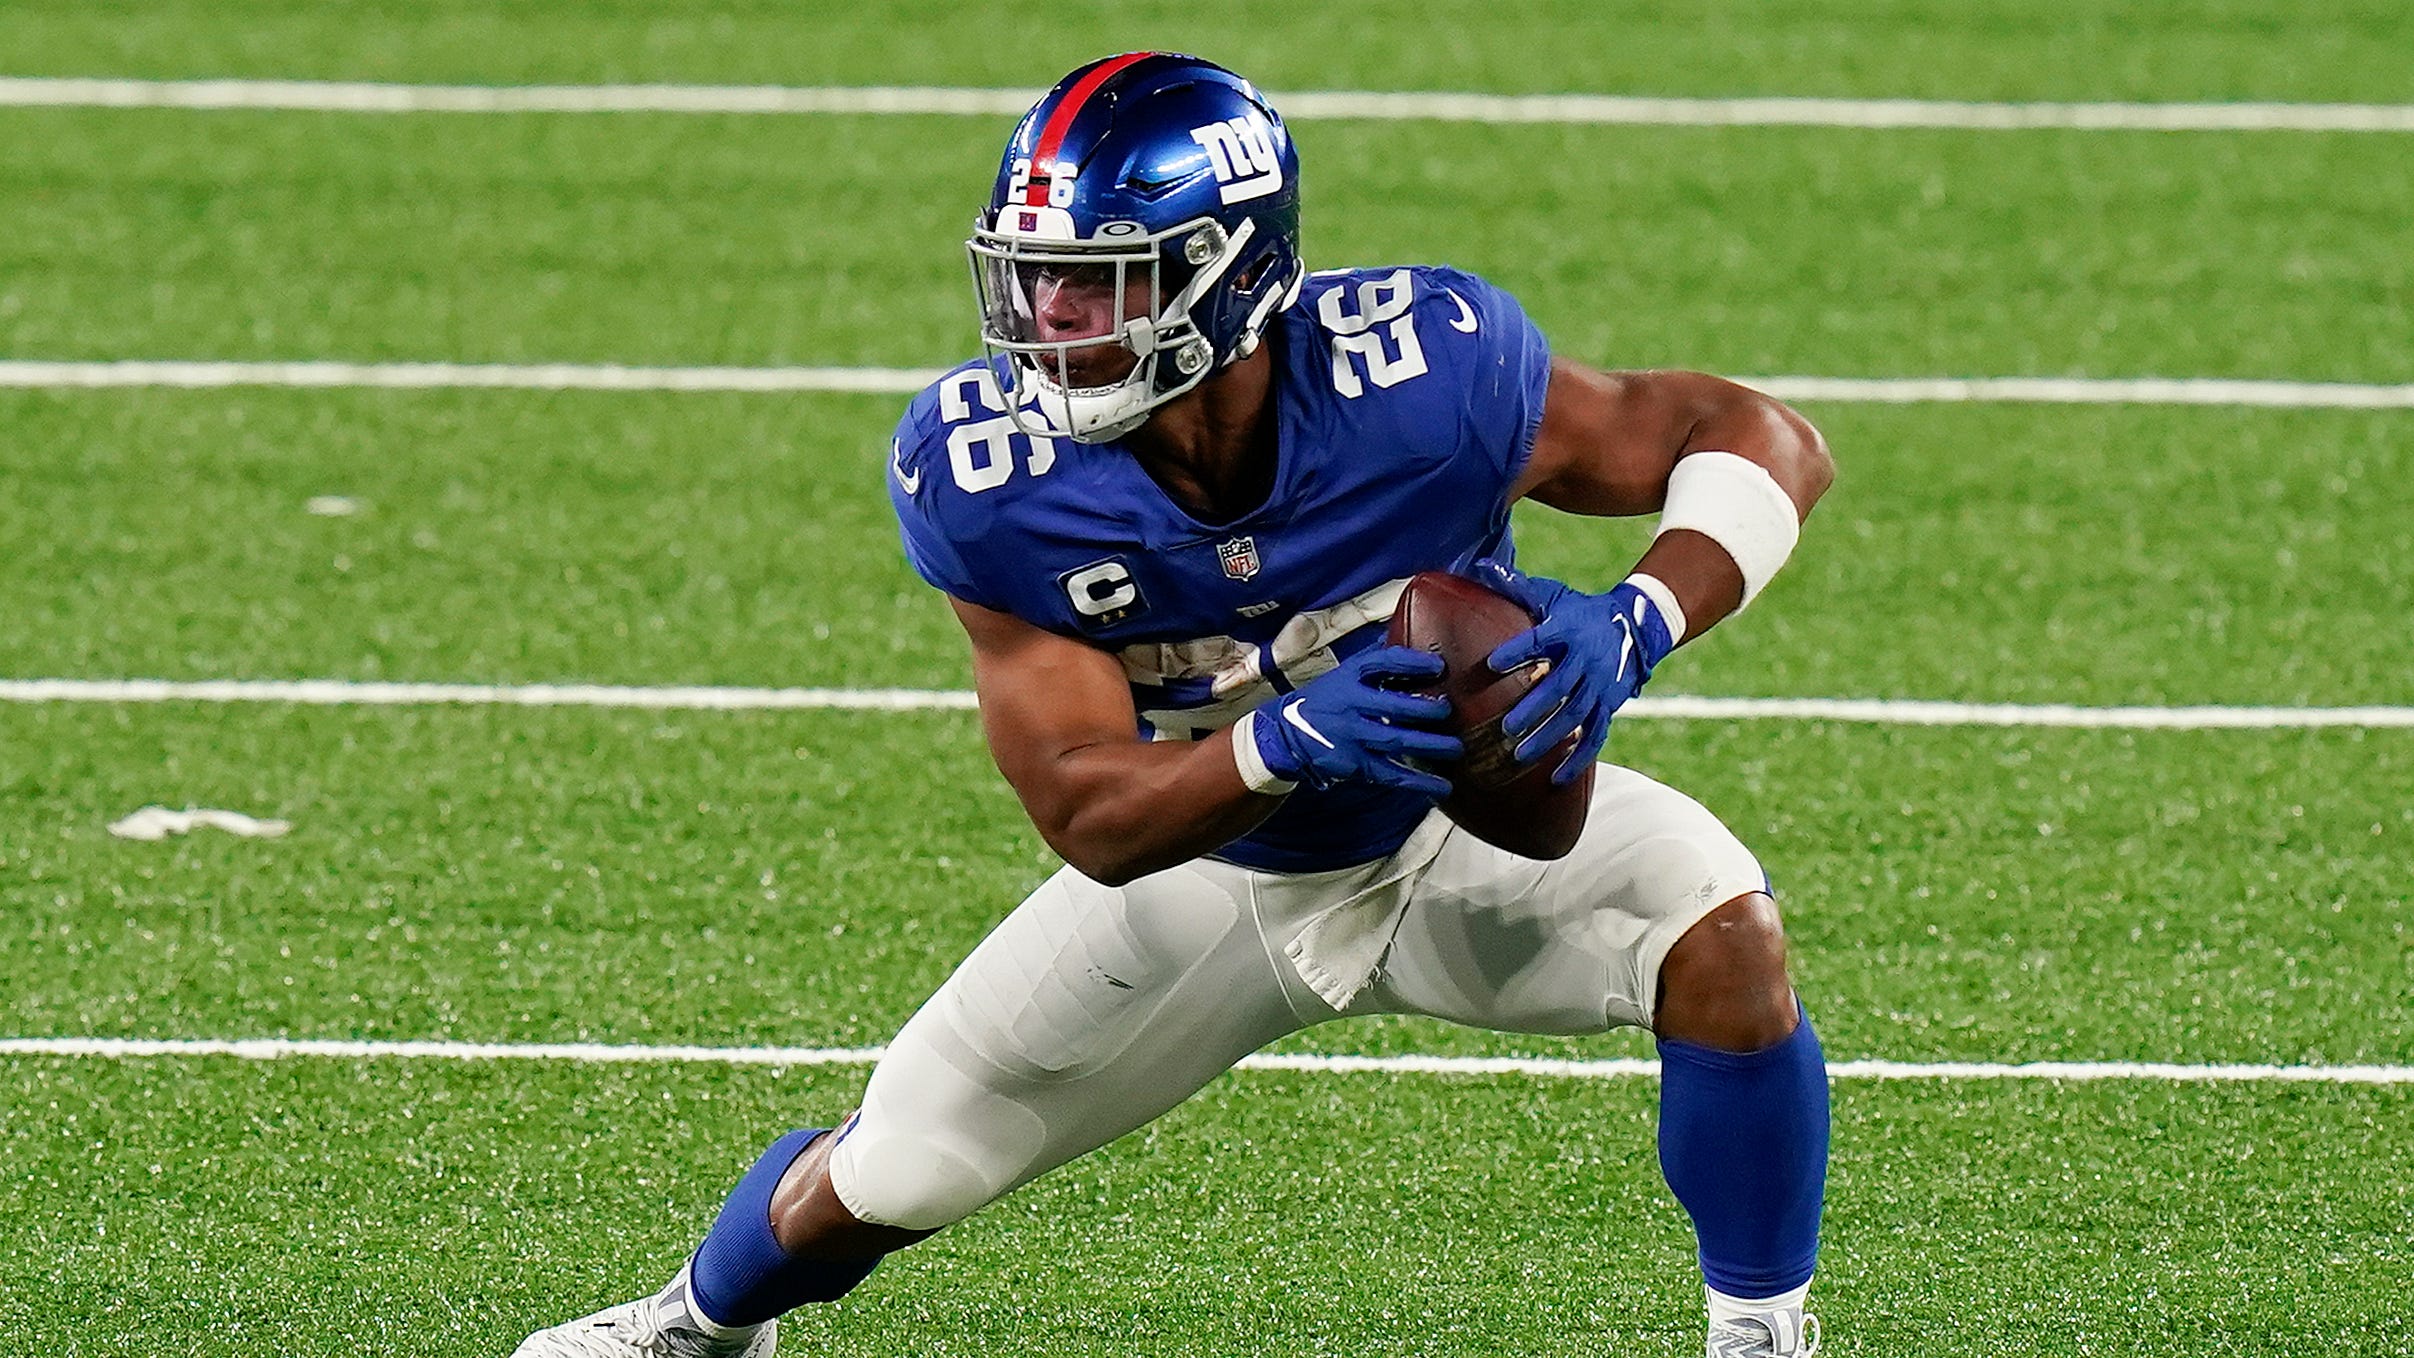 Saquon Barkley, Giants RB, says he'll be even better after torn ACL